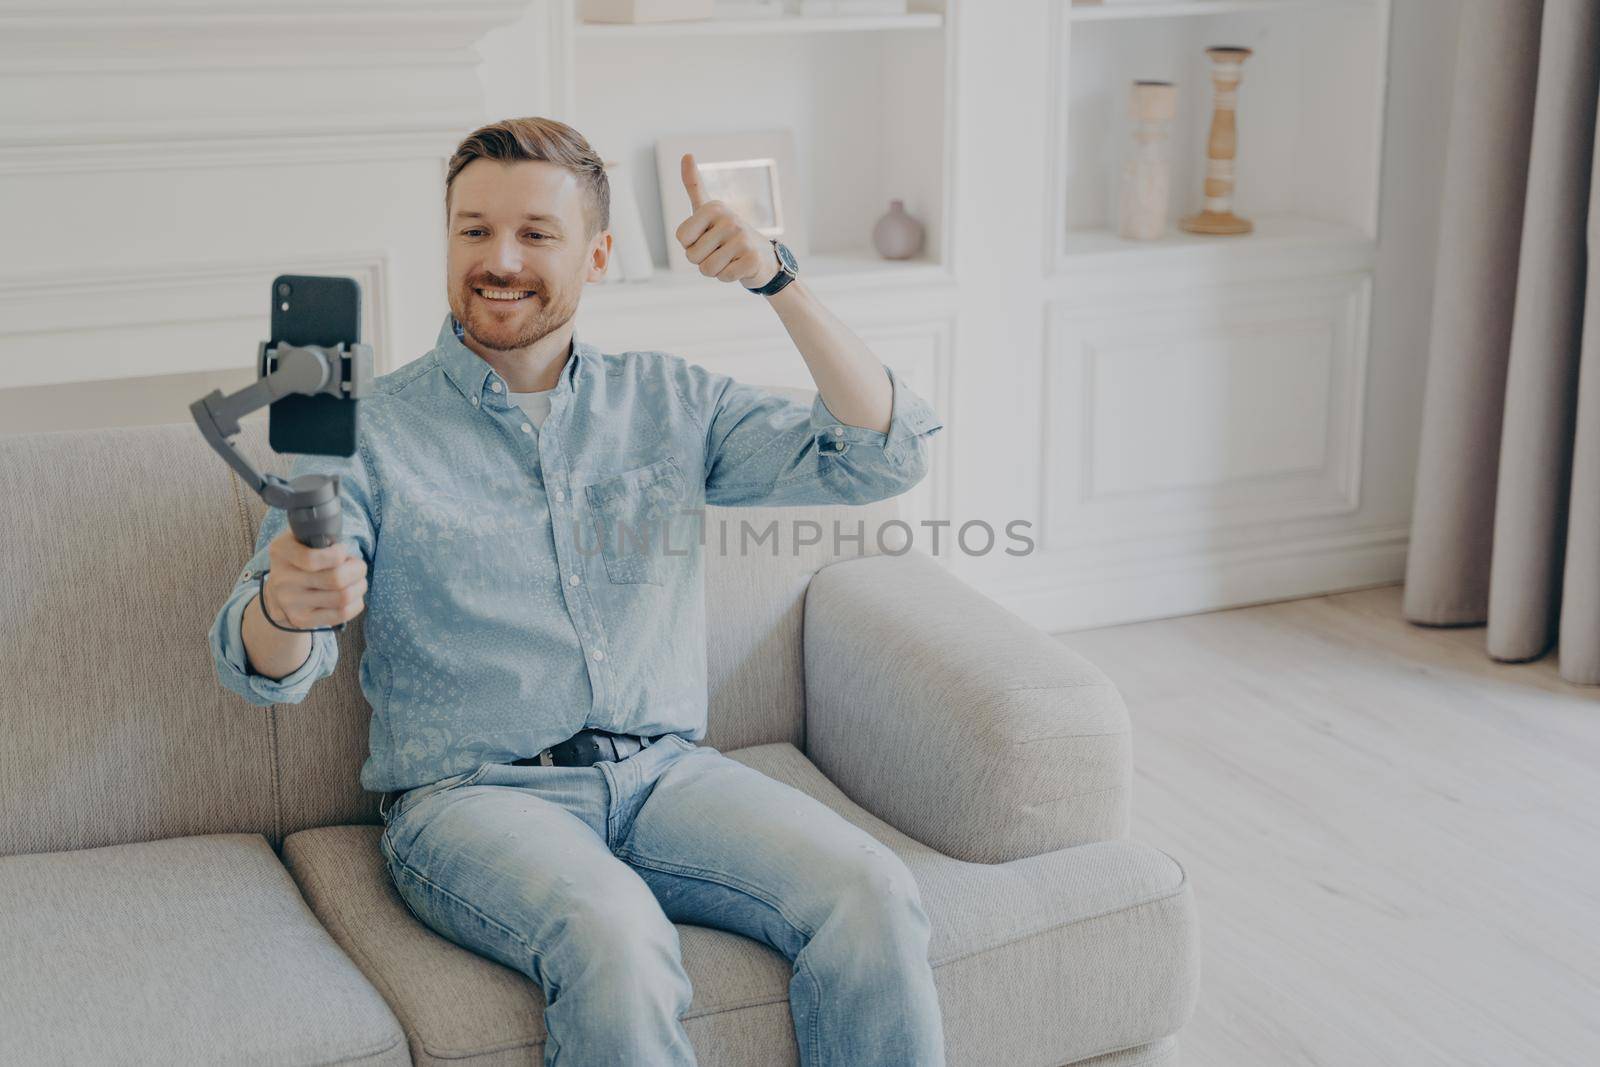 Young man showing thumbs up gesture on camera on mobile phone by vkstock